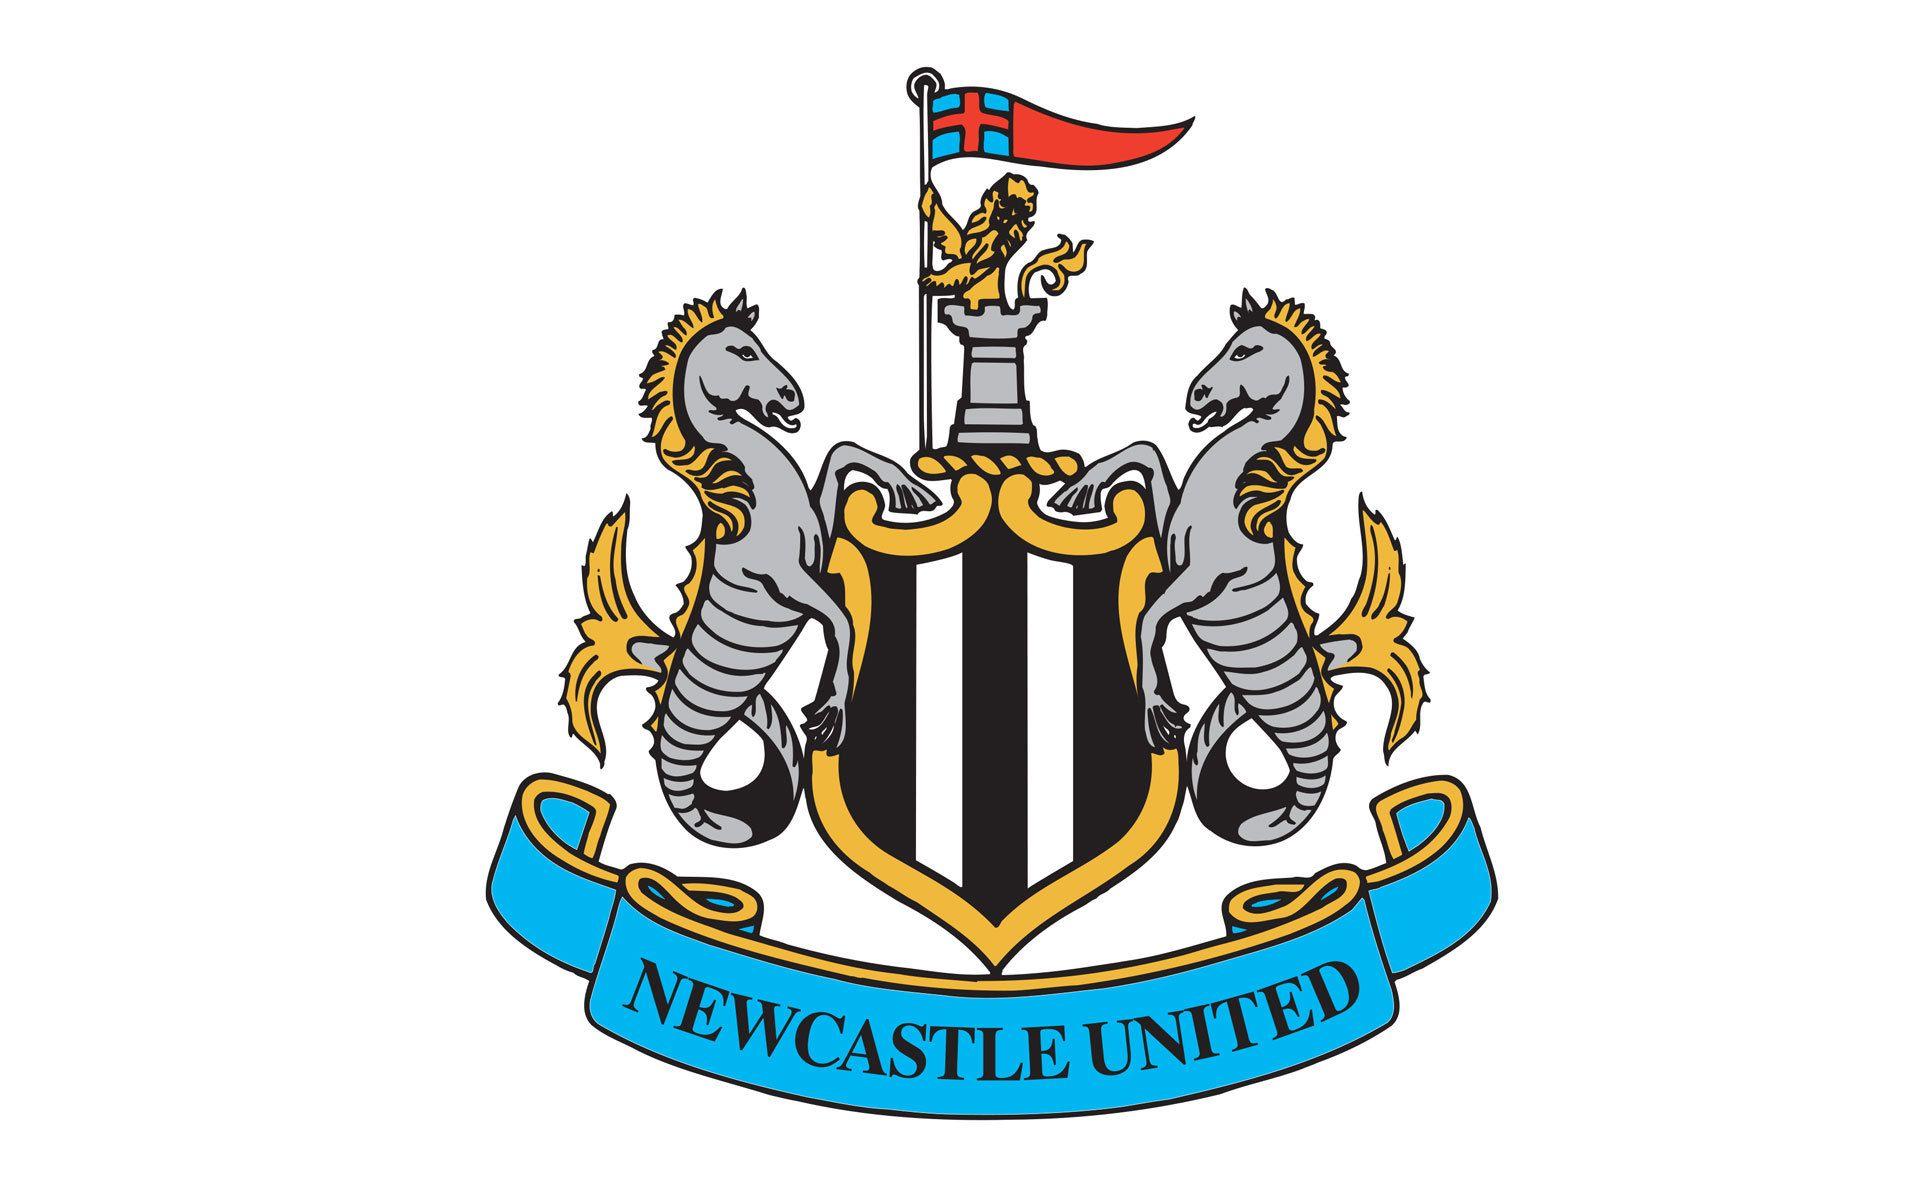 The team england Newcastle United wallpaper and image